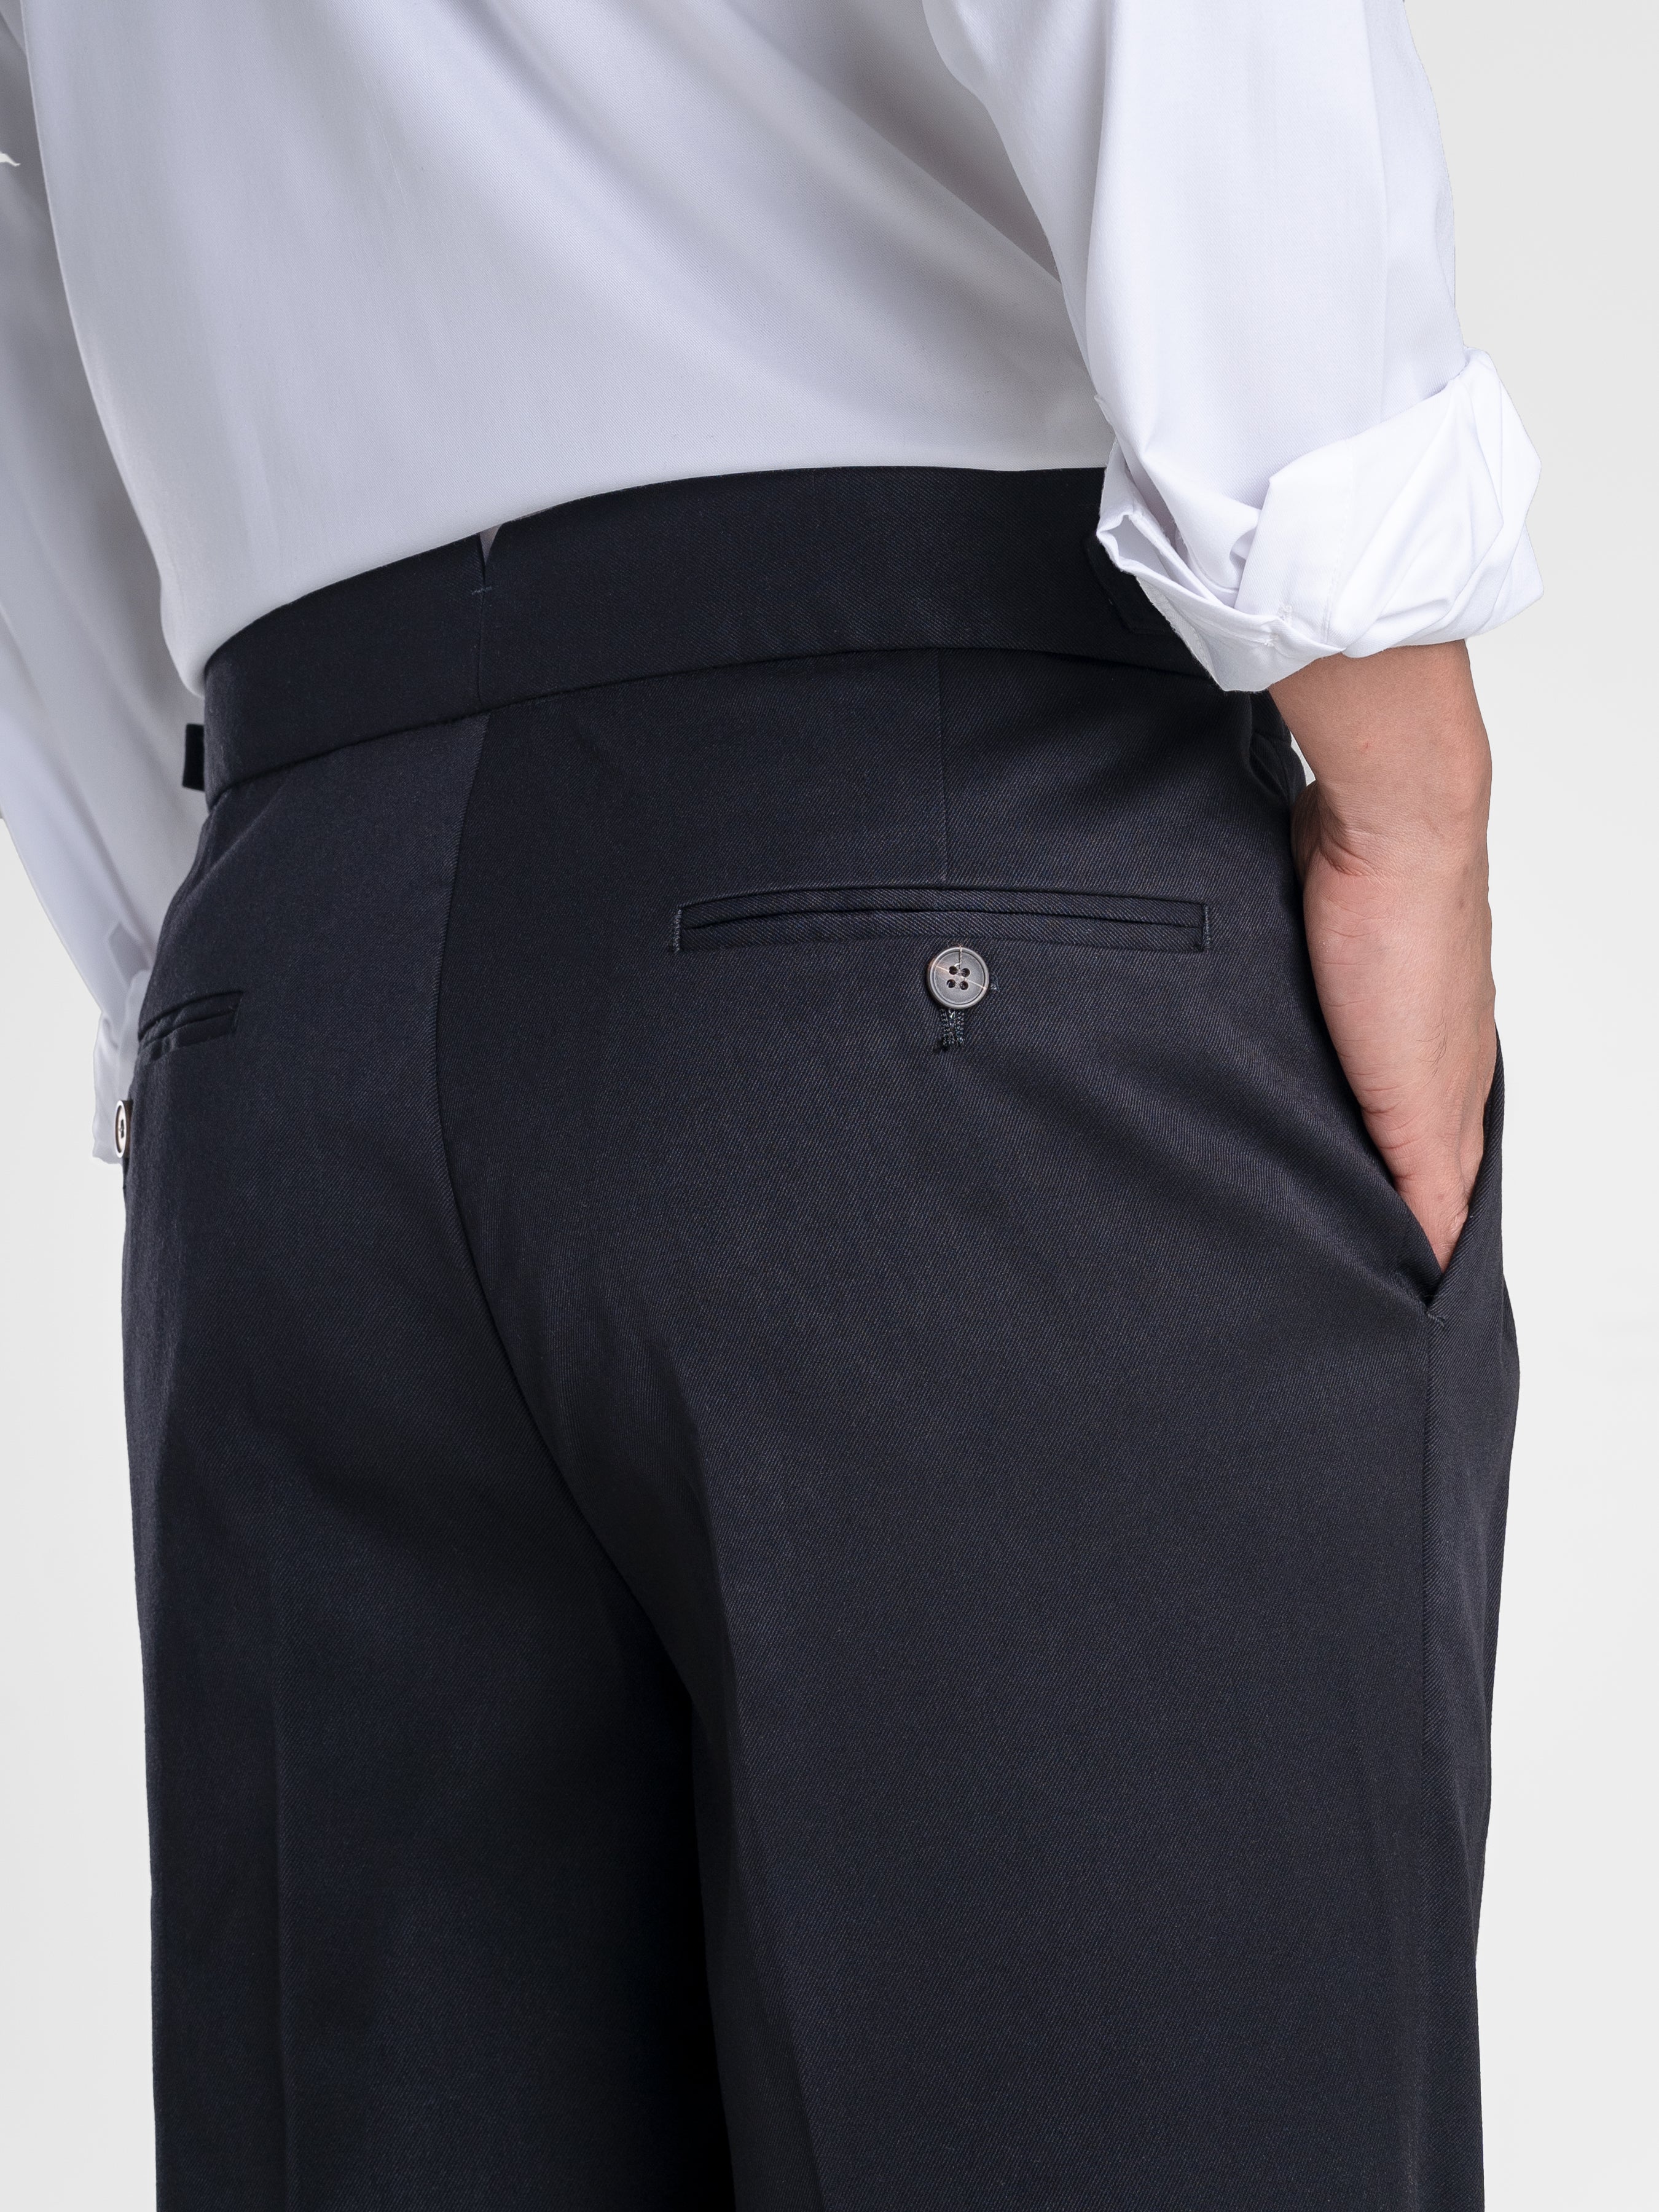 Trousers With Side Adjusters - Black Solid Cuffed (Stretchable)